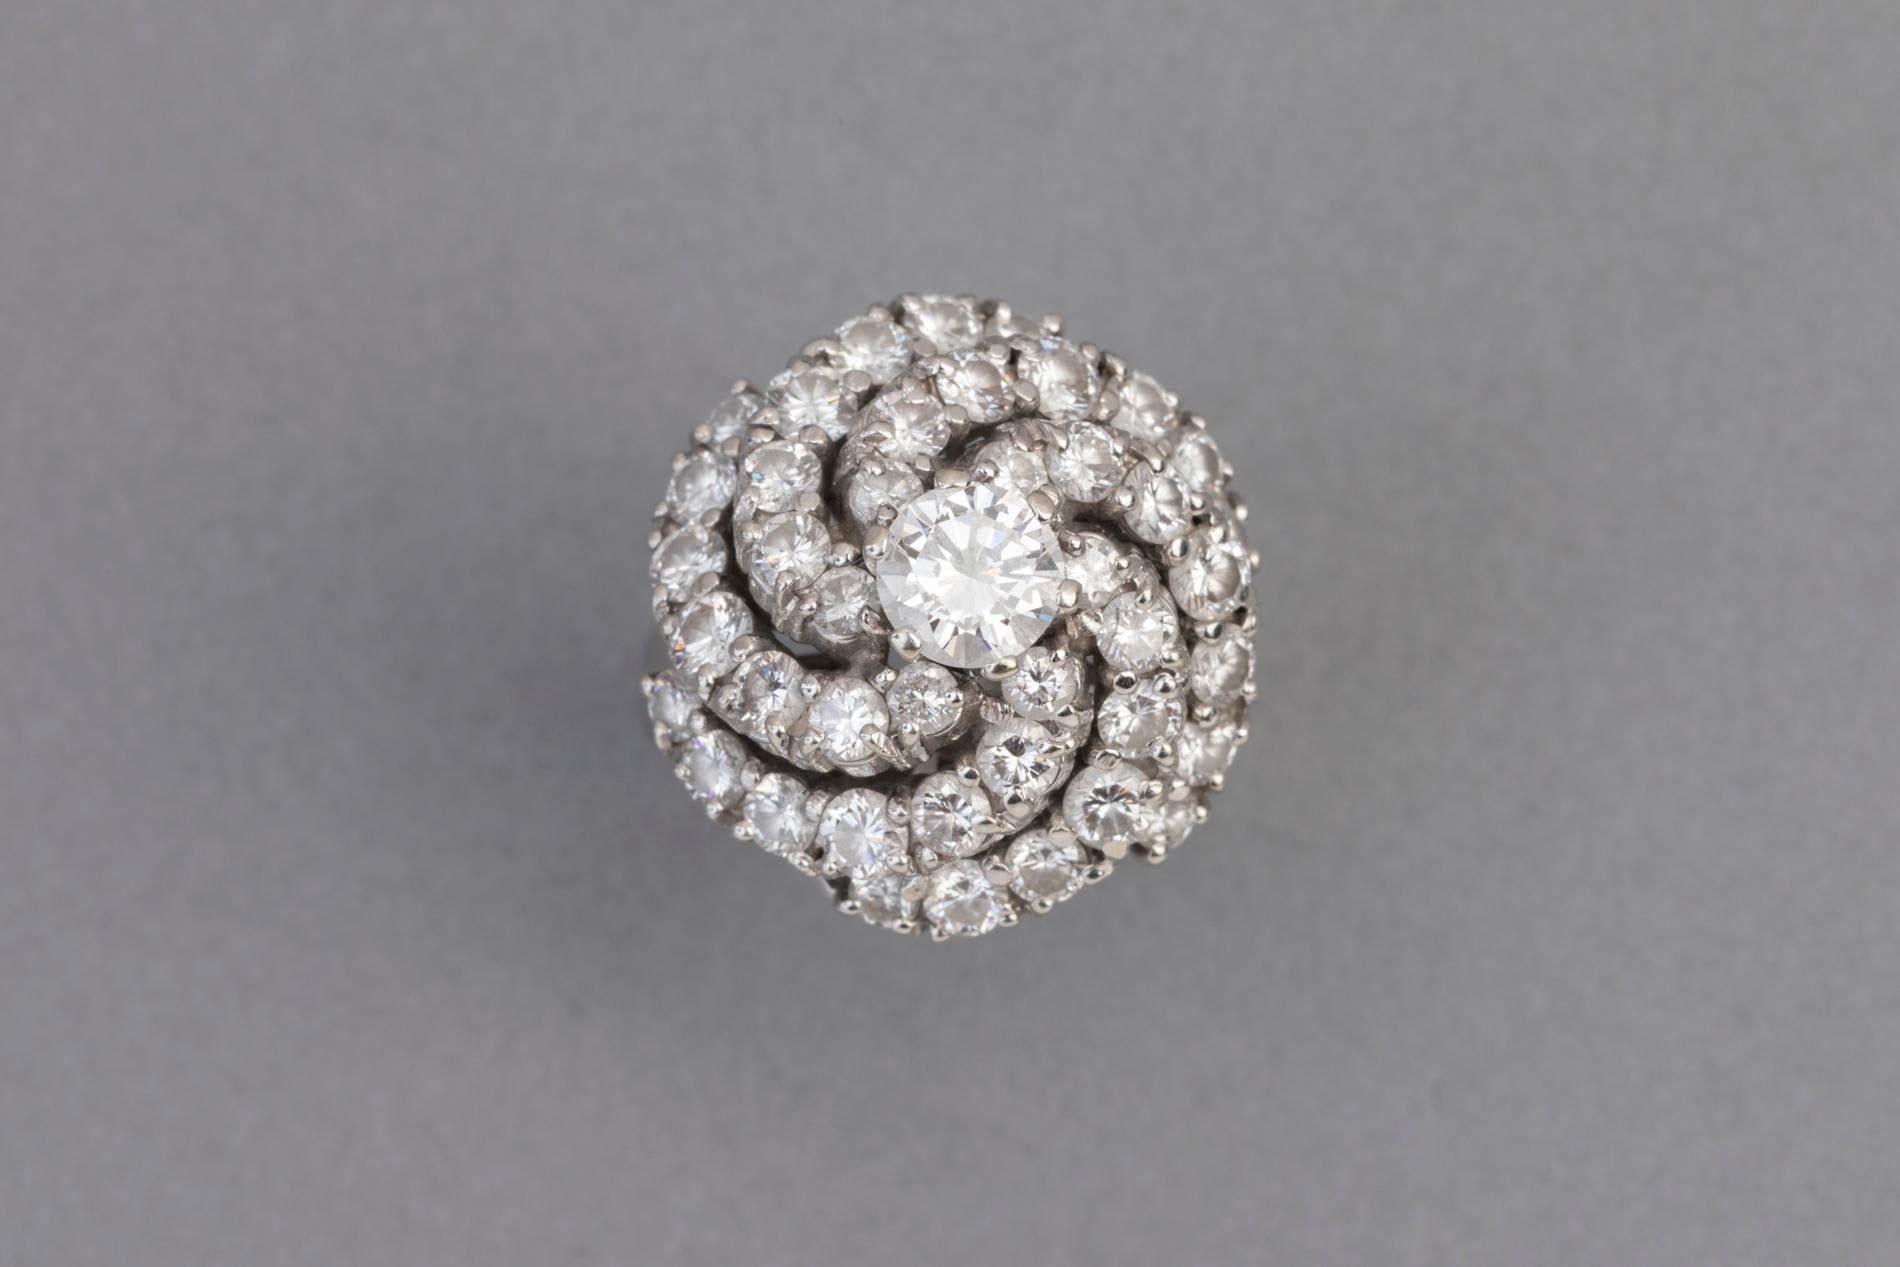 Very beautiful ring, made in France circa 1960.  
Mounted in white gold 750.   The diamonds are quality, the ring is spectacular. 
The diamonds are white colour and good clarity.  The central diamond weight 0.55 carats estimate + 2.5 carats. 